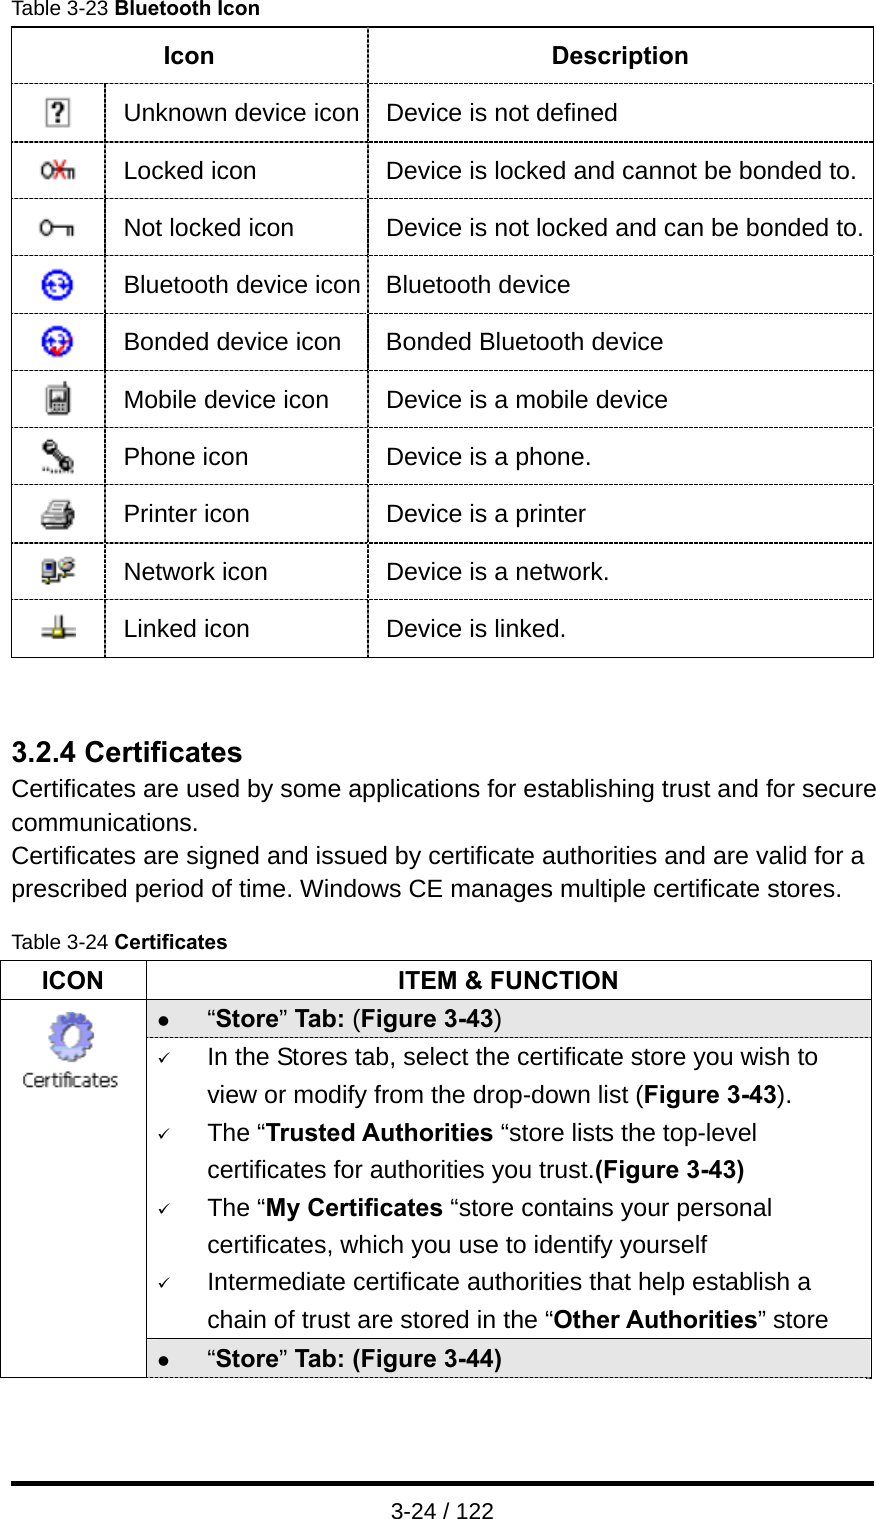  3-24 / 122 Table 3-23 Bluetooth Icon Icon Description  Unknown device icon Device is not defined  Locked icon  Device is locked and cannot be bonded to. Not locked icon  Device is not locked and can be bonded to. Bluetooth device icon Bluetooth device  Bonded device icon  Bonded Bluetooth device  Mobile device icon  Device is a mobile device  Phone icon  Device is a phone.  Printer icon  Device is a printer  Network icon  Device is a network.  Linked icon  Device is linked.   3.2.4 Certificates Certificates are used by some applications for establishing trust and for secure communications. Certificates are signed and issued by certificate authorities and are valid for a prescribed period of time. Windows CE manages multiple certificate stores.  Table 3-24 Certificates ICON  ITEM &amp; FUNCTION z “Store” Tab: (Figure 3-43) 9 In the Stores tab, select the certificate store you wish to view or modify from the drop-down list (Figure 3-43).   9 The “Trusted Authorities “store lists the top-level certificates for authorities you trust.(Figure 3-43) 9 The “My Certificates “store contains your personal certificates, which you use to identify yourself 9 Intermediate certificate authorities that help establish a chain of trust are stored in the “Other Authorities” store  z “Store” Tab: (Figure 3-44) 